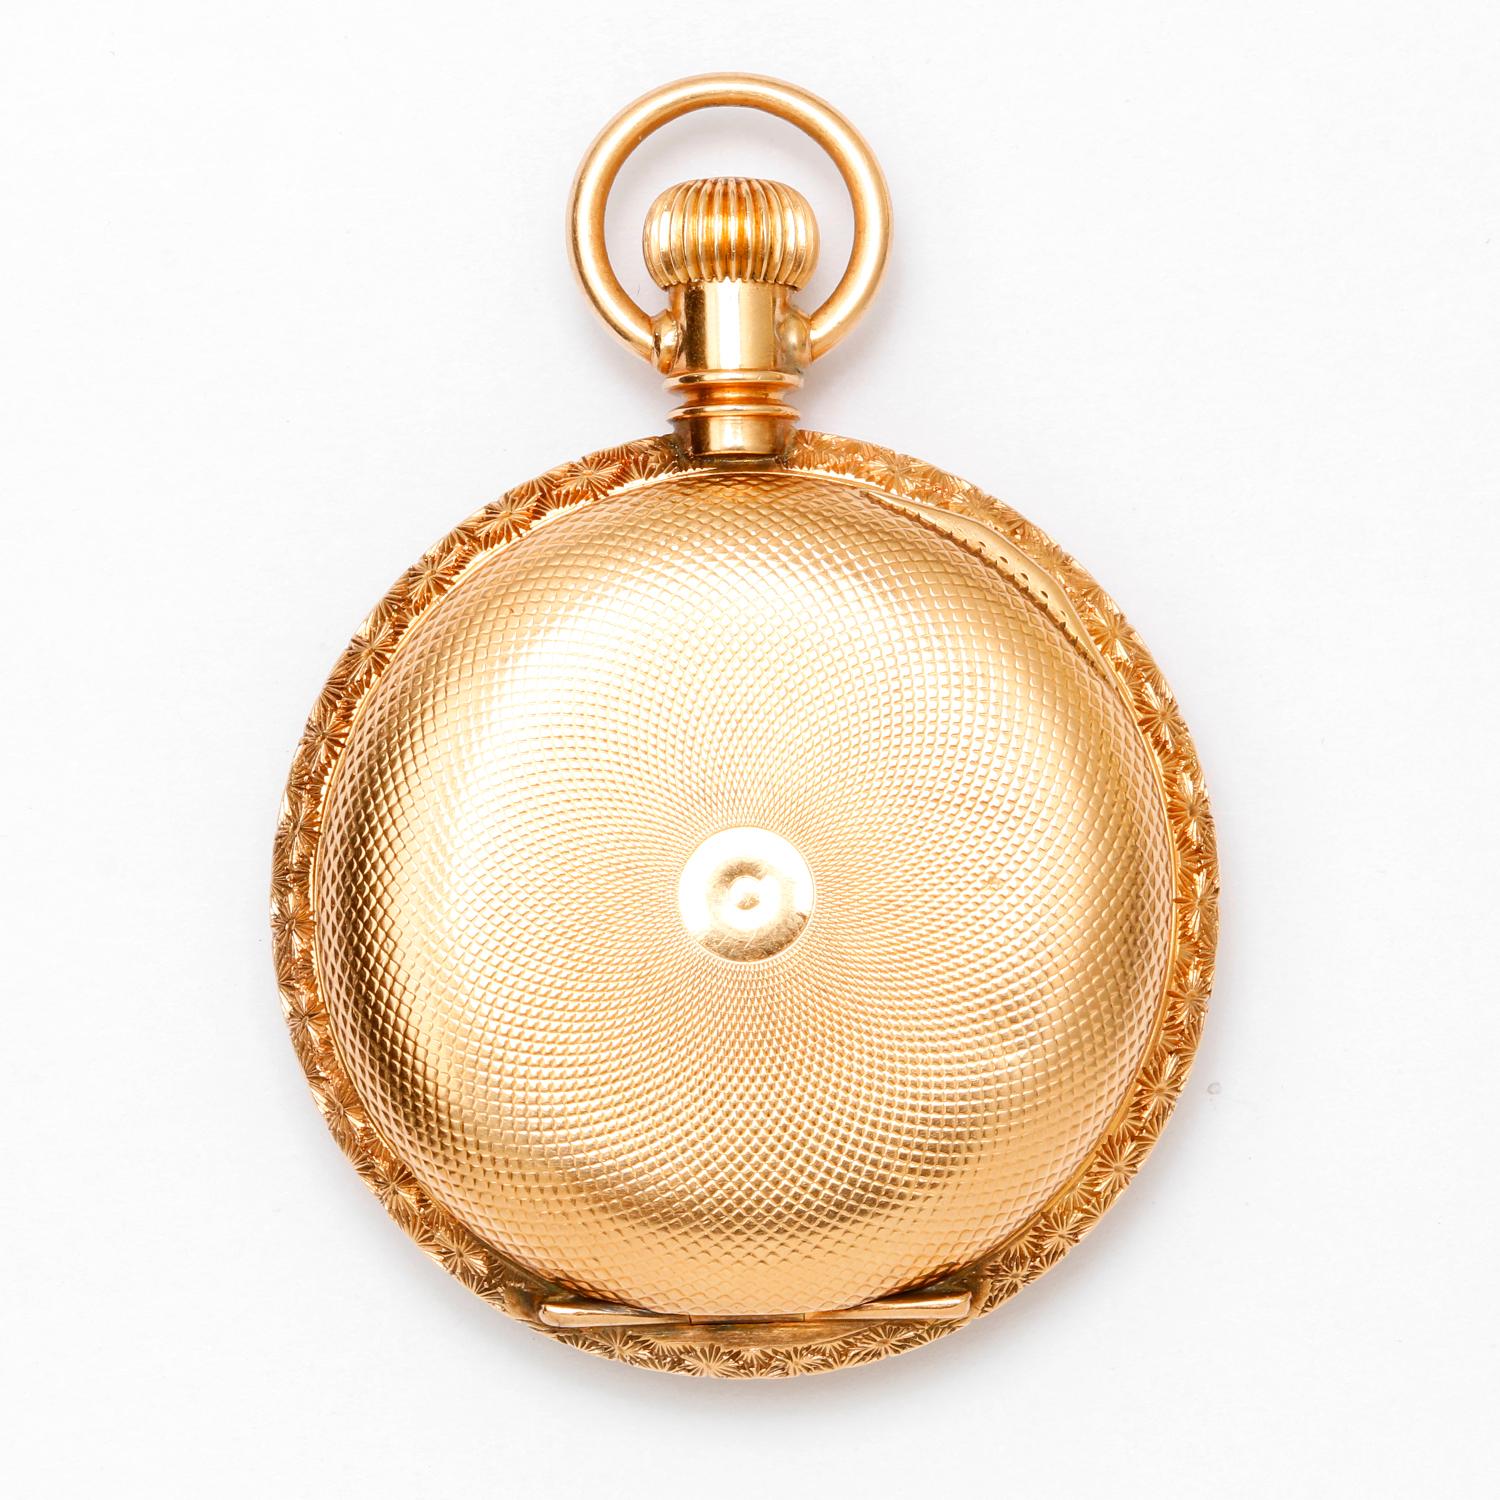 Vintage Elgin Pocket Watch 14K Yellow Gold Pocket Watch  - Manual winding ( 37 mm ) . 14K Yellow gold with coin edged. Front and back of case are intricately engraved with a floral botanical design around the engine turned design in the center.